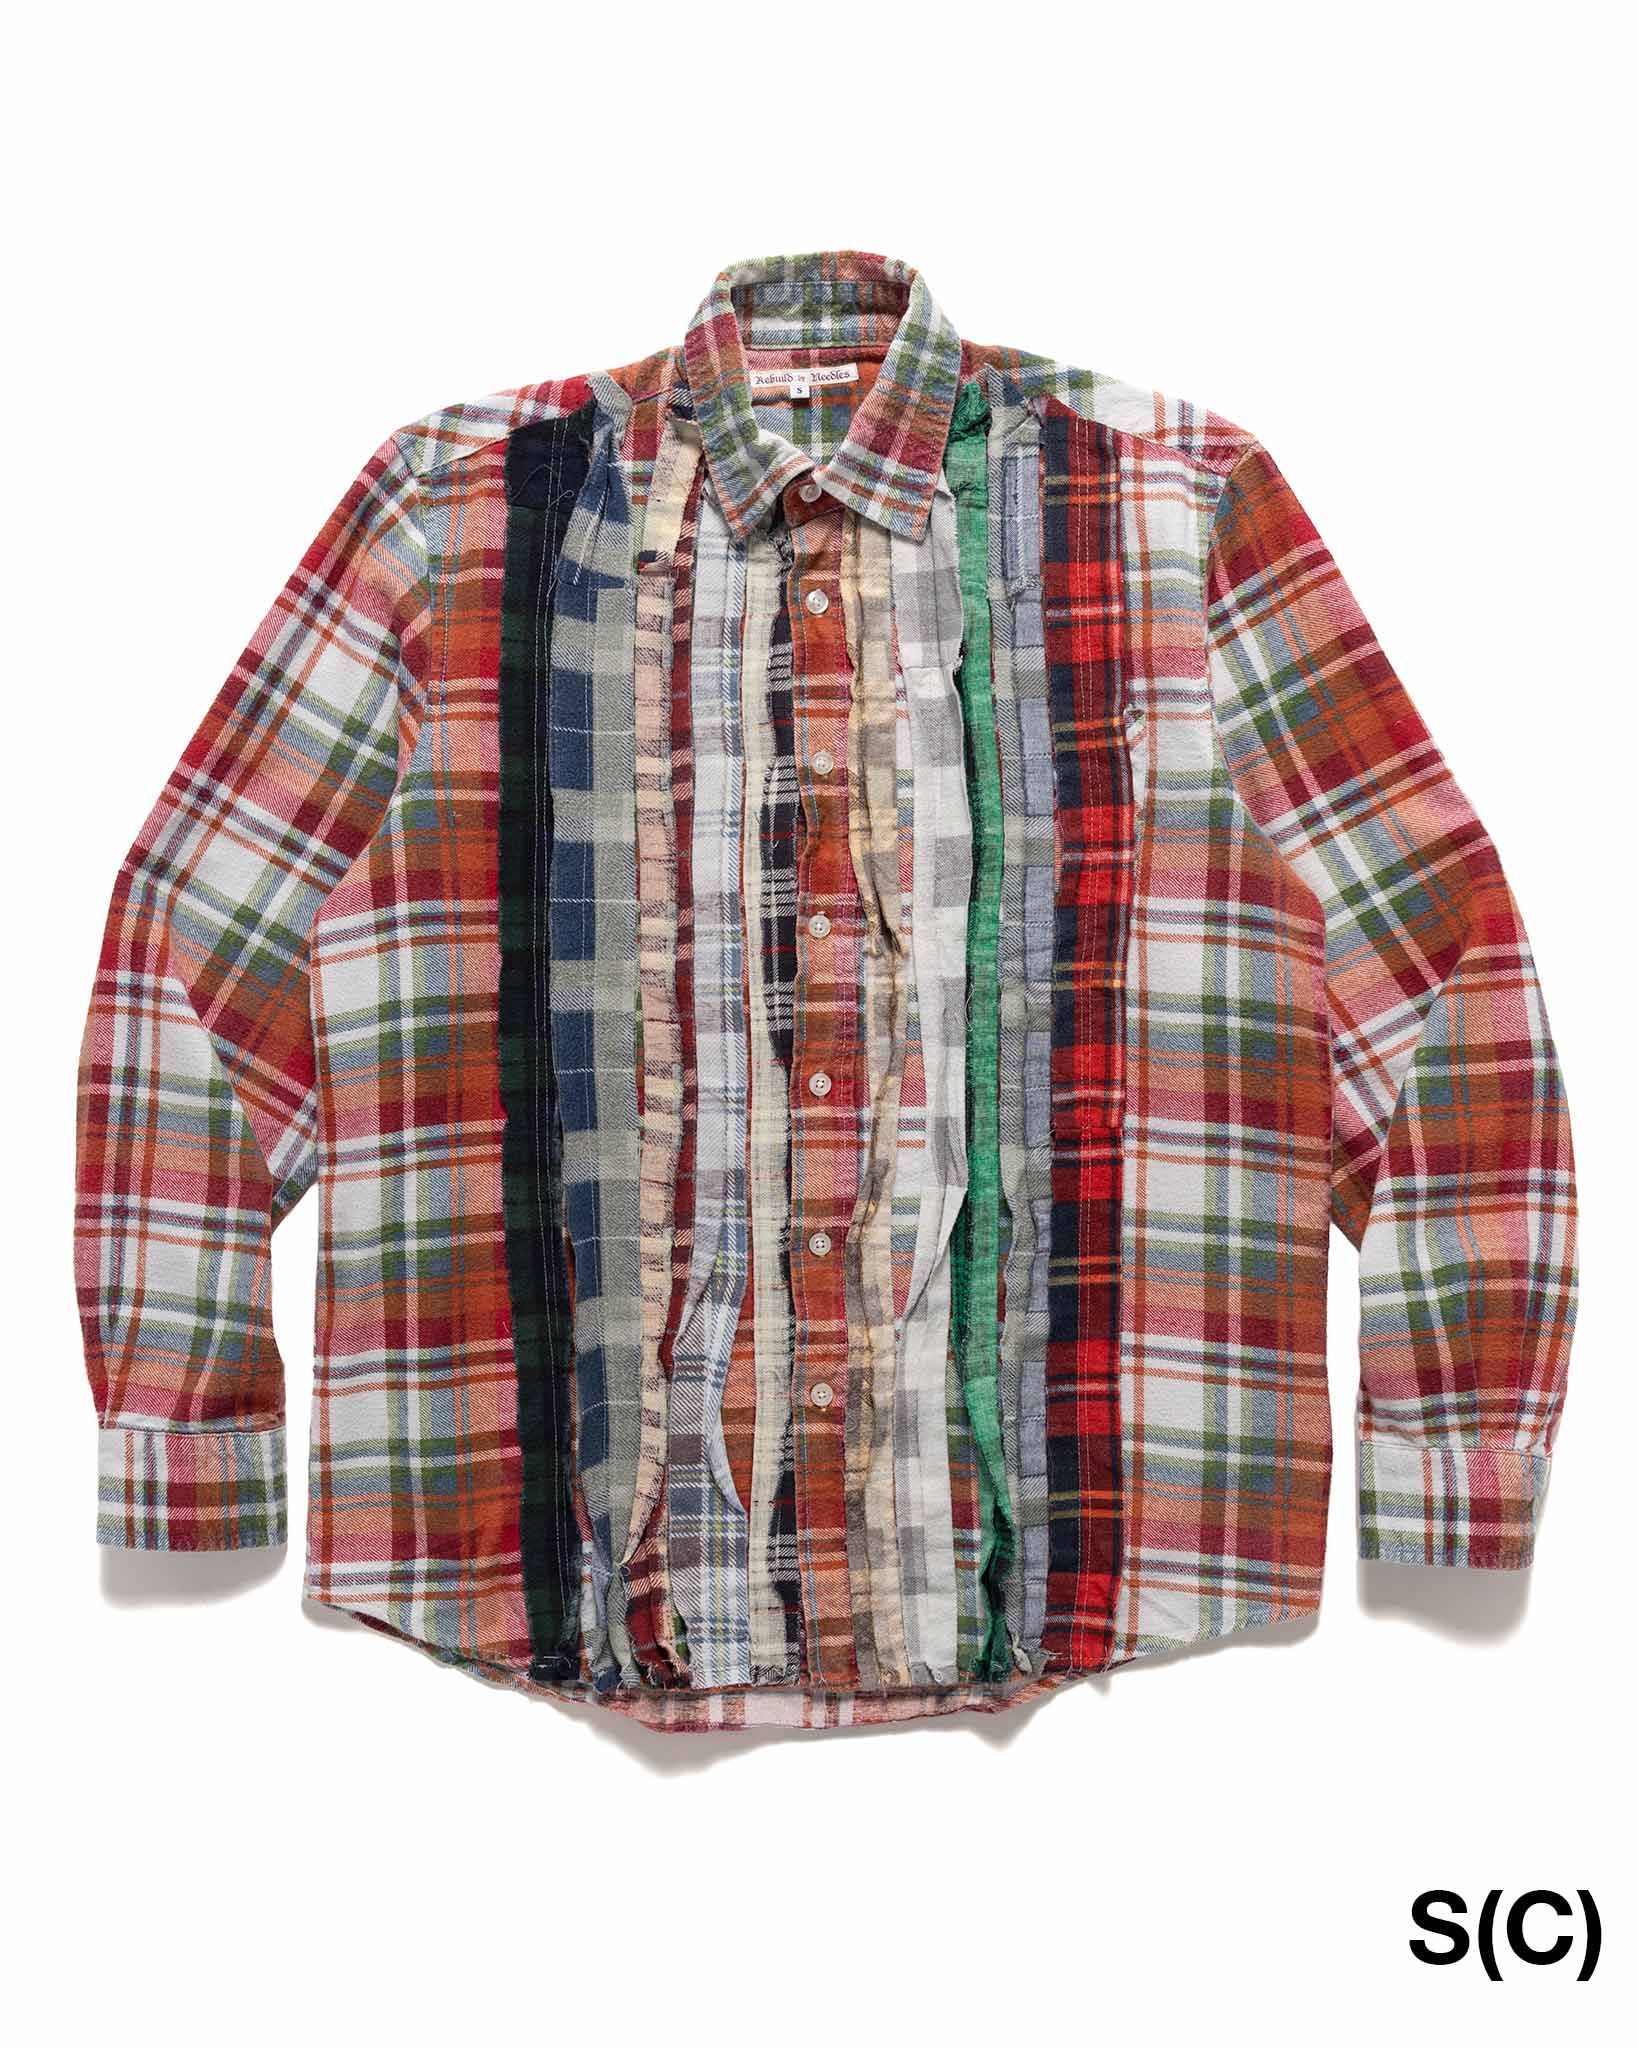 Rebuild by Needles Flannel Shirt -> Ribbon Shirt Assorted - 8